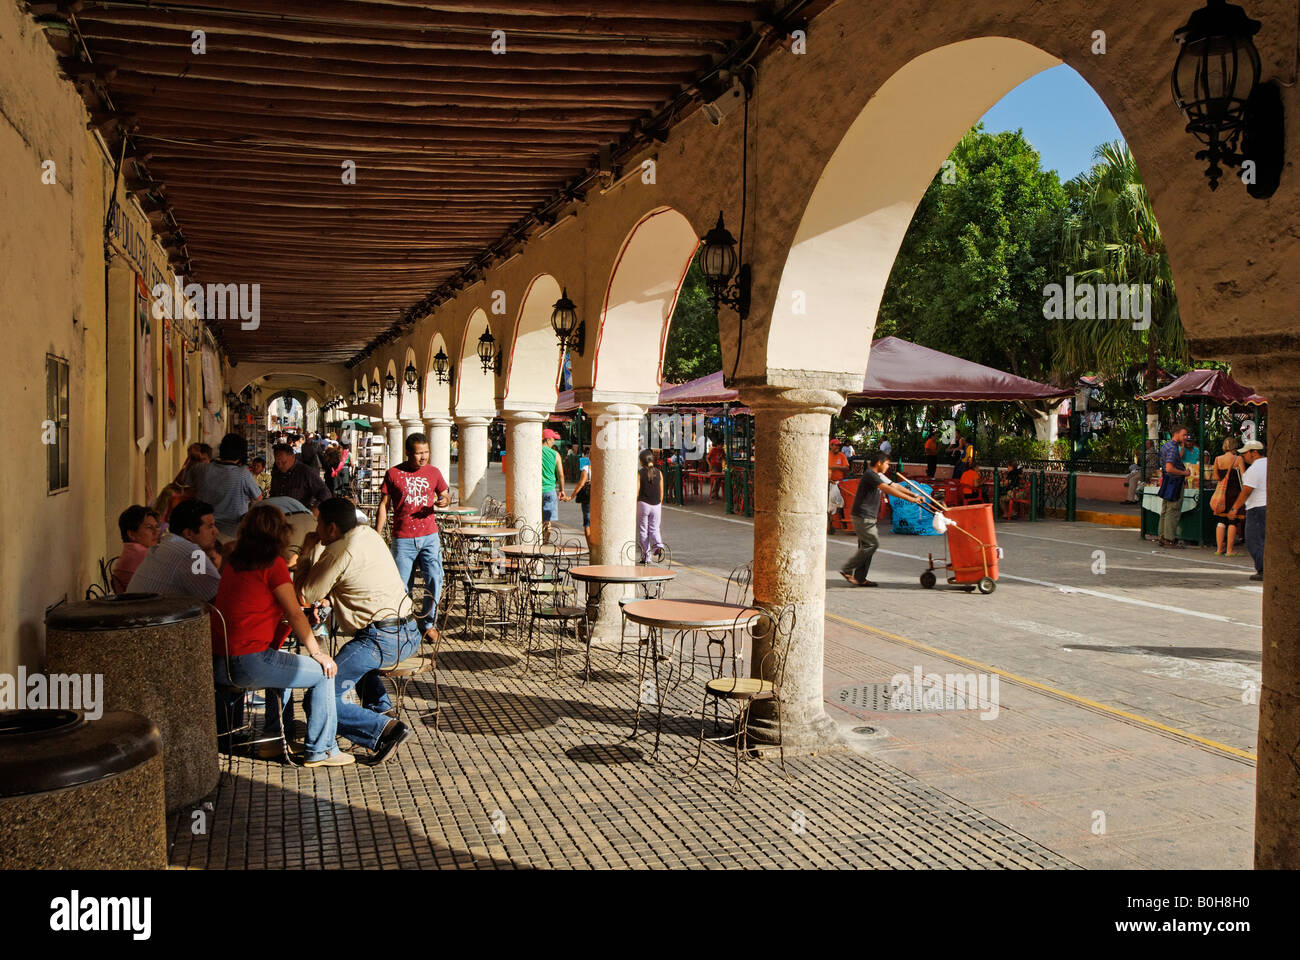 Arched passageway and sidewalk cafe in the historic centre of Merida, Yucatan, Mexico Stock Photo